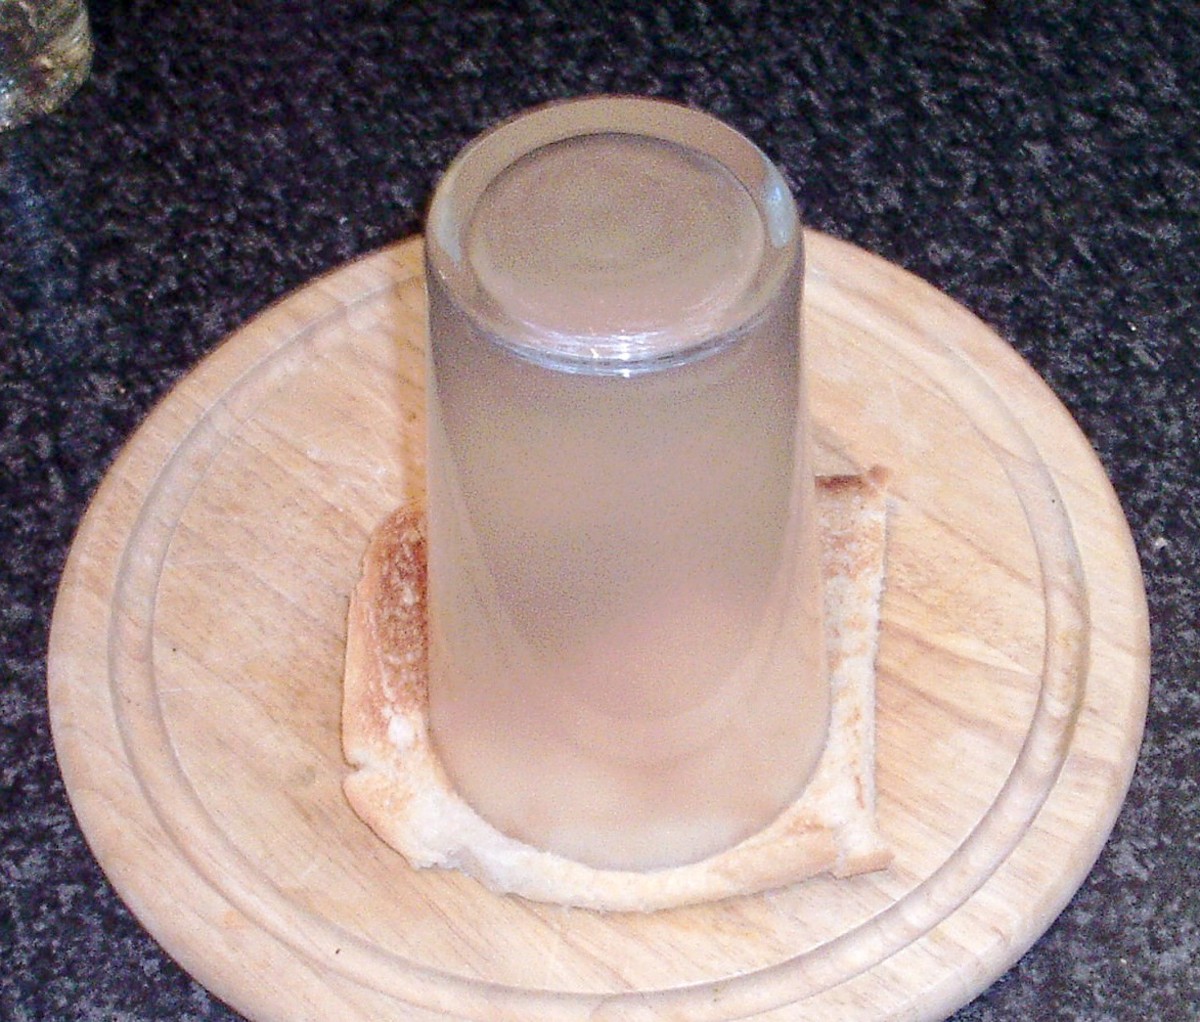 Circle is cut from slice of toast with a large drinking glass